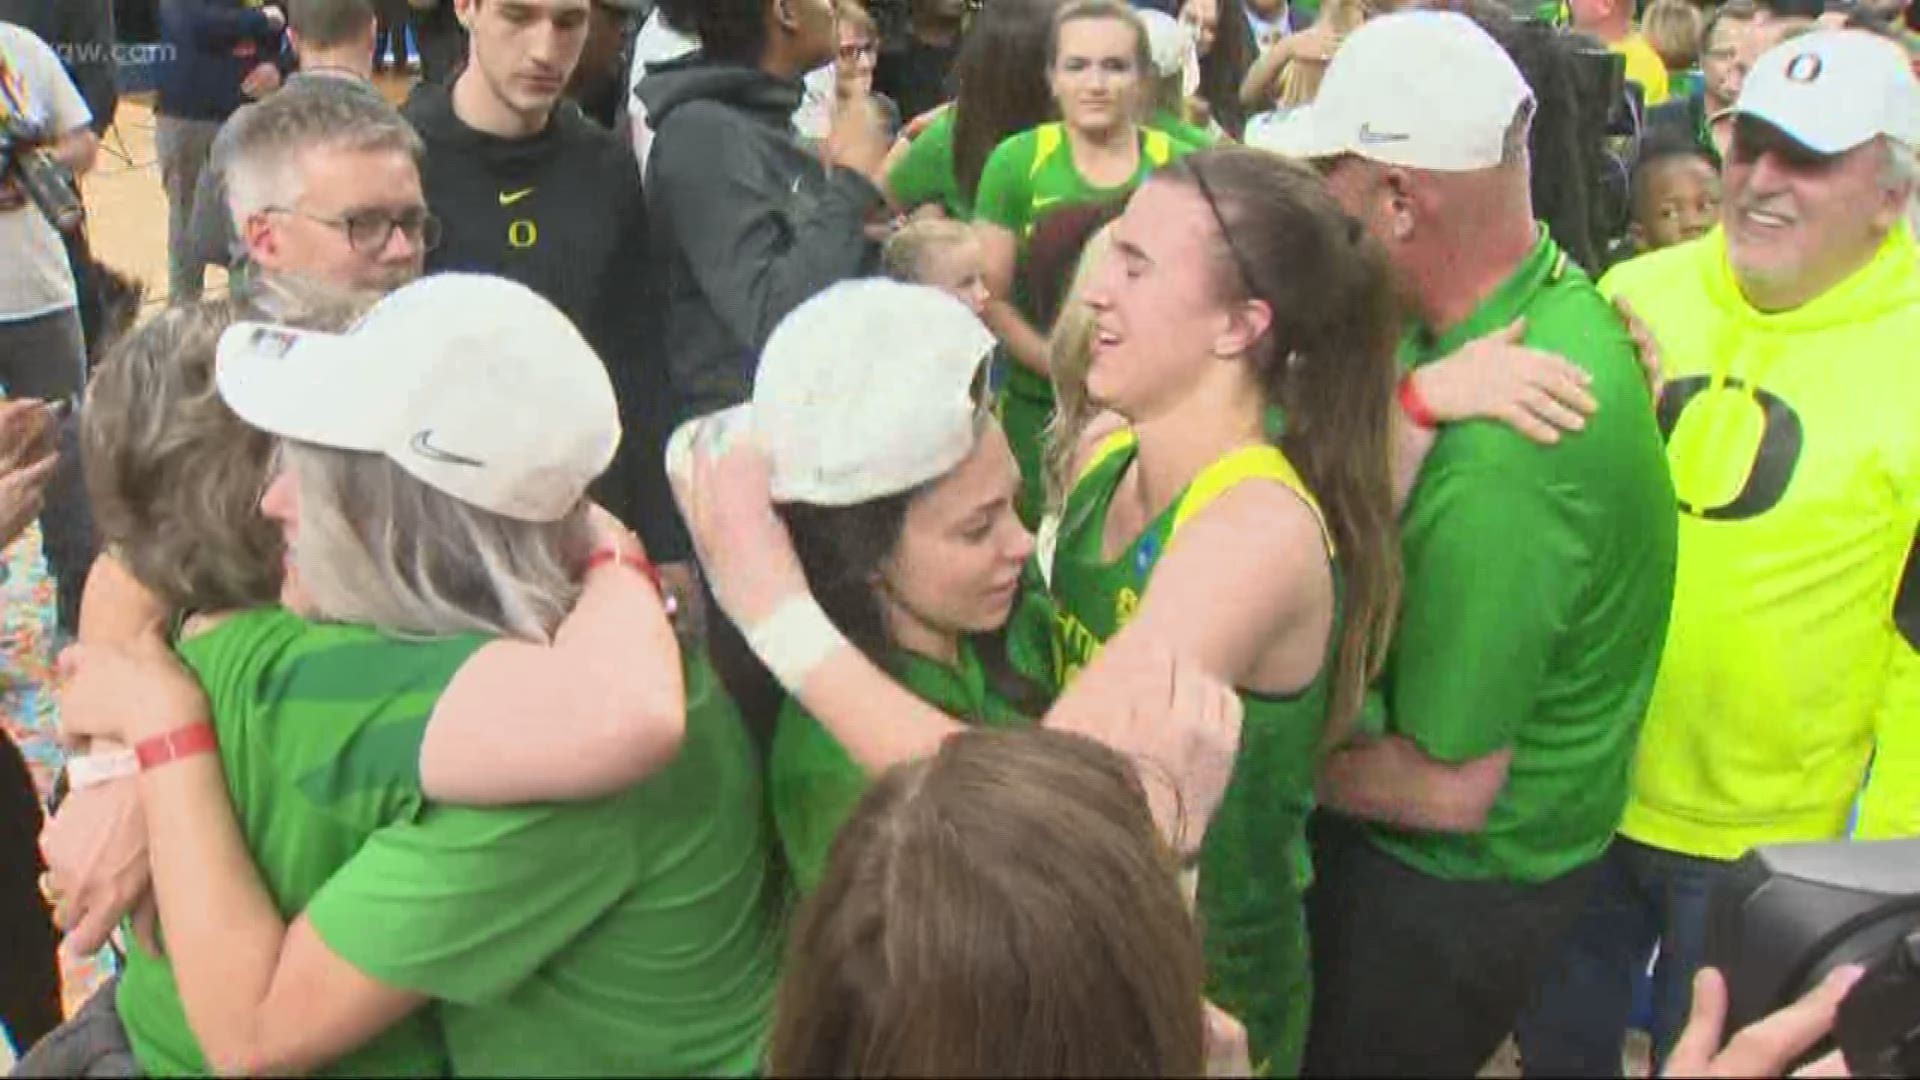 Oregon is preparing to face Baylor in the Final Four.